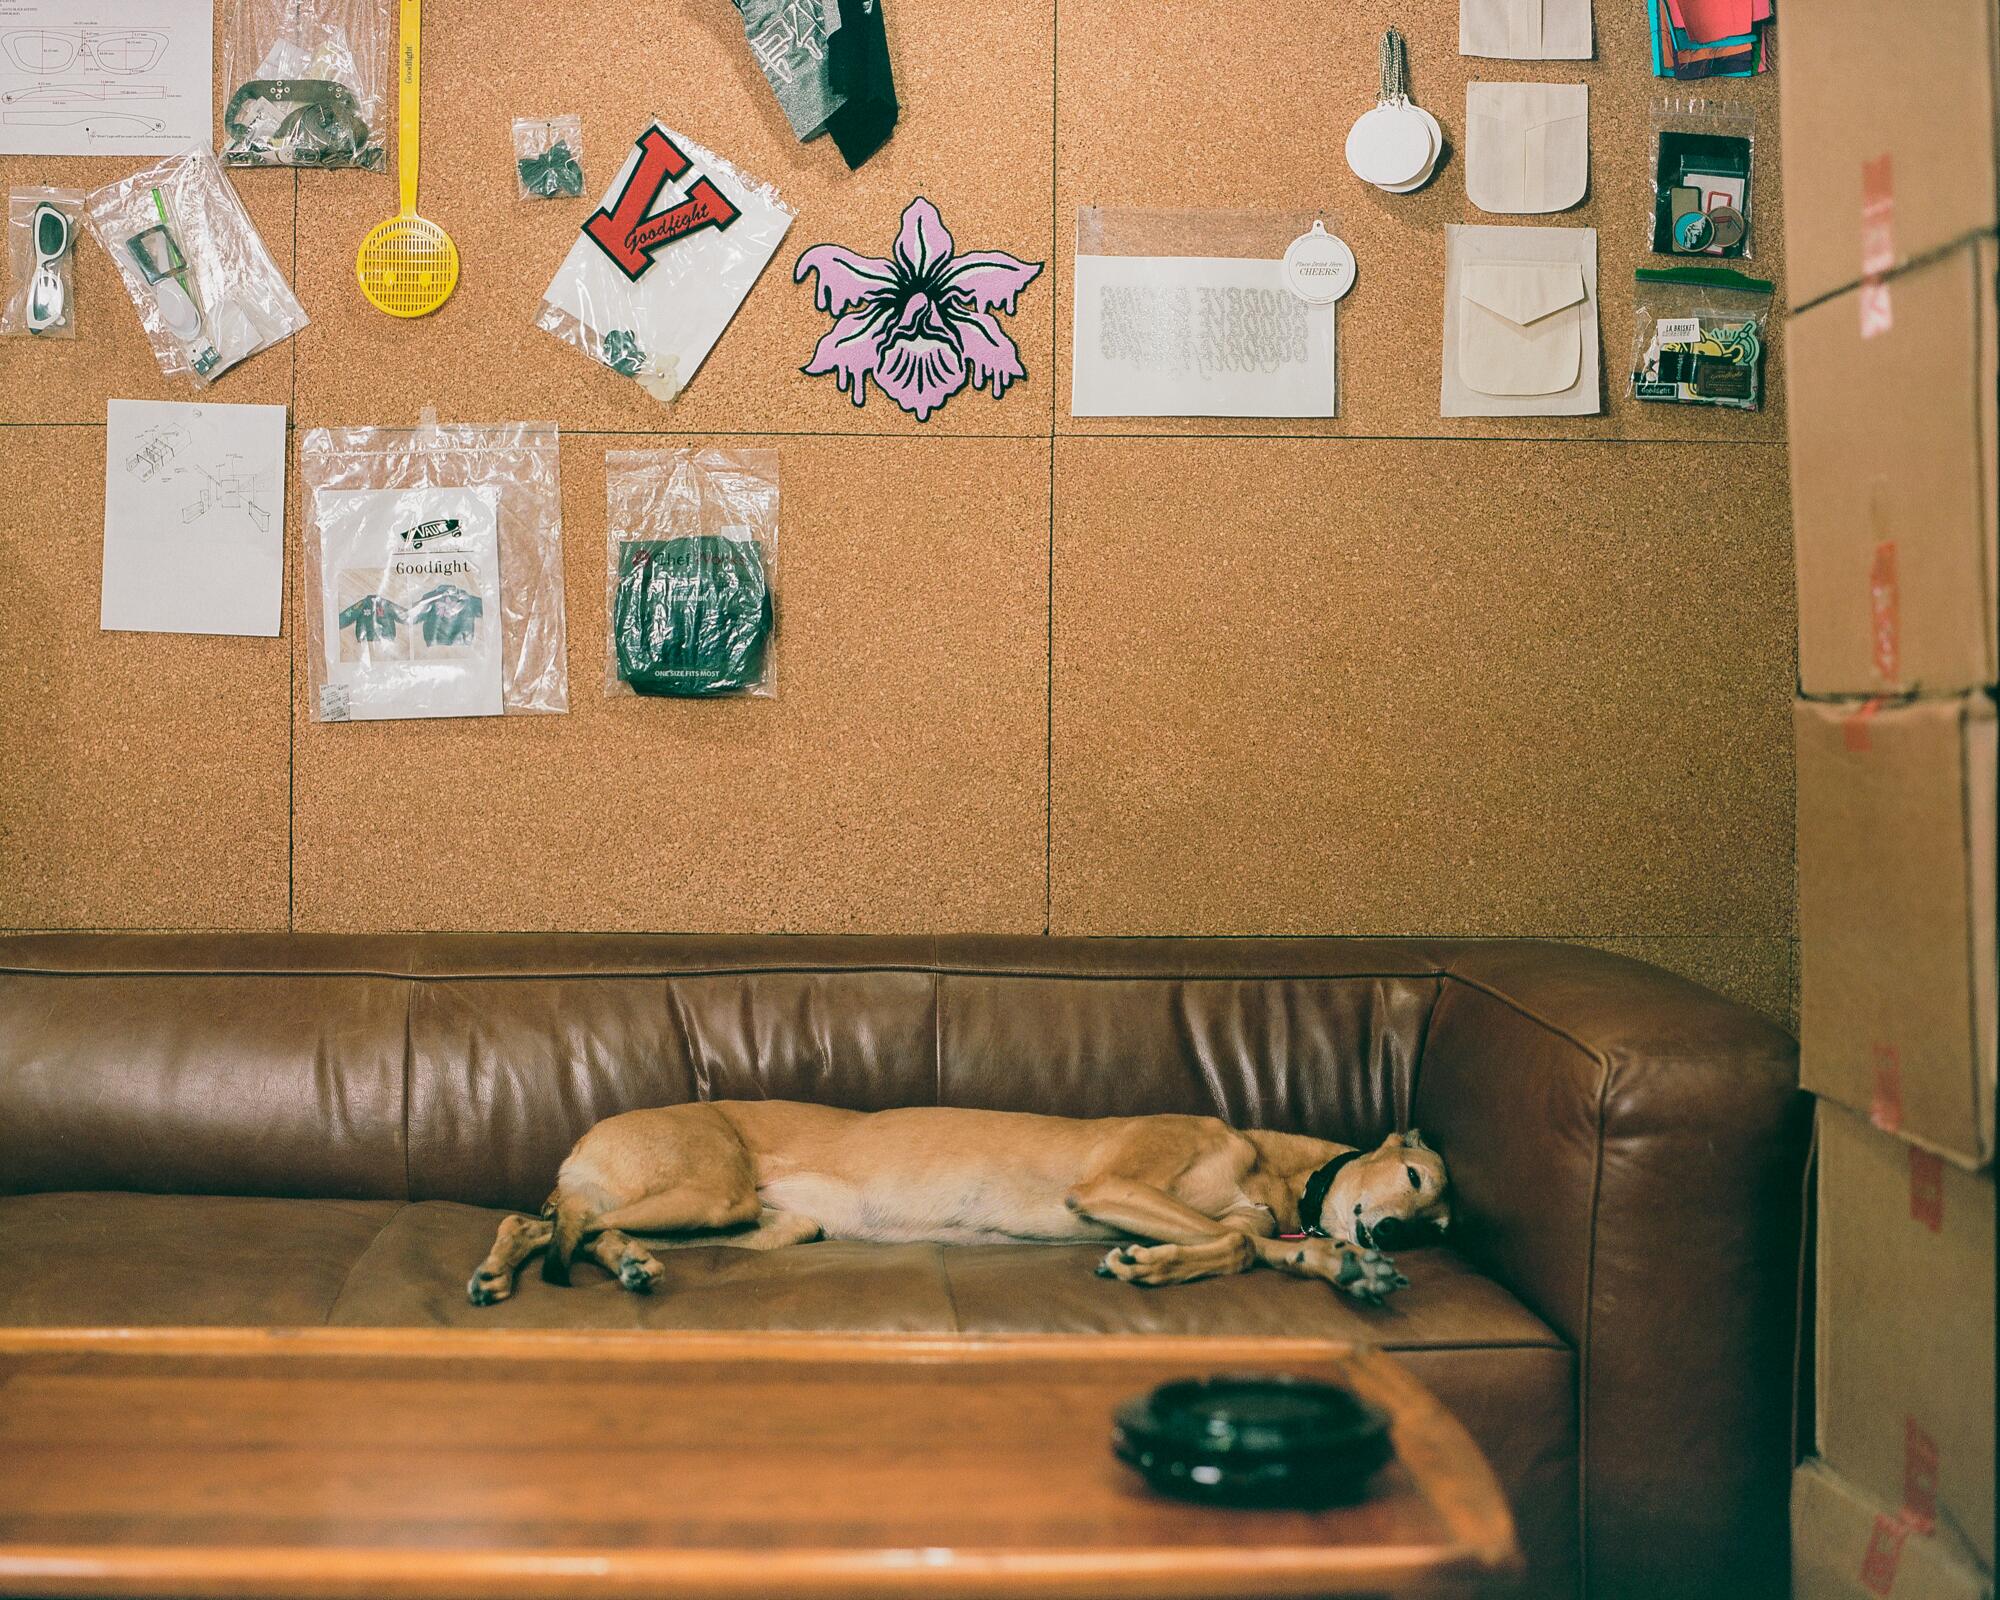 A dog sleeps on a brown leather couch